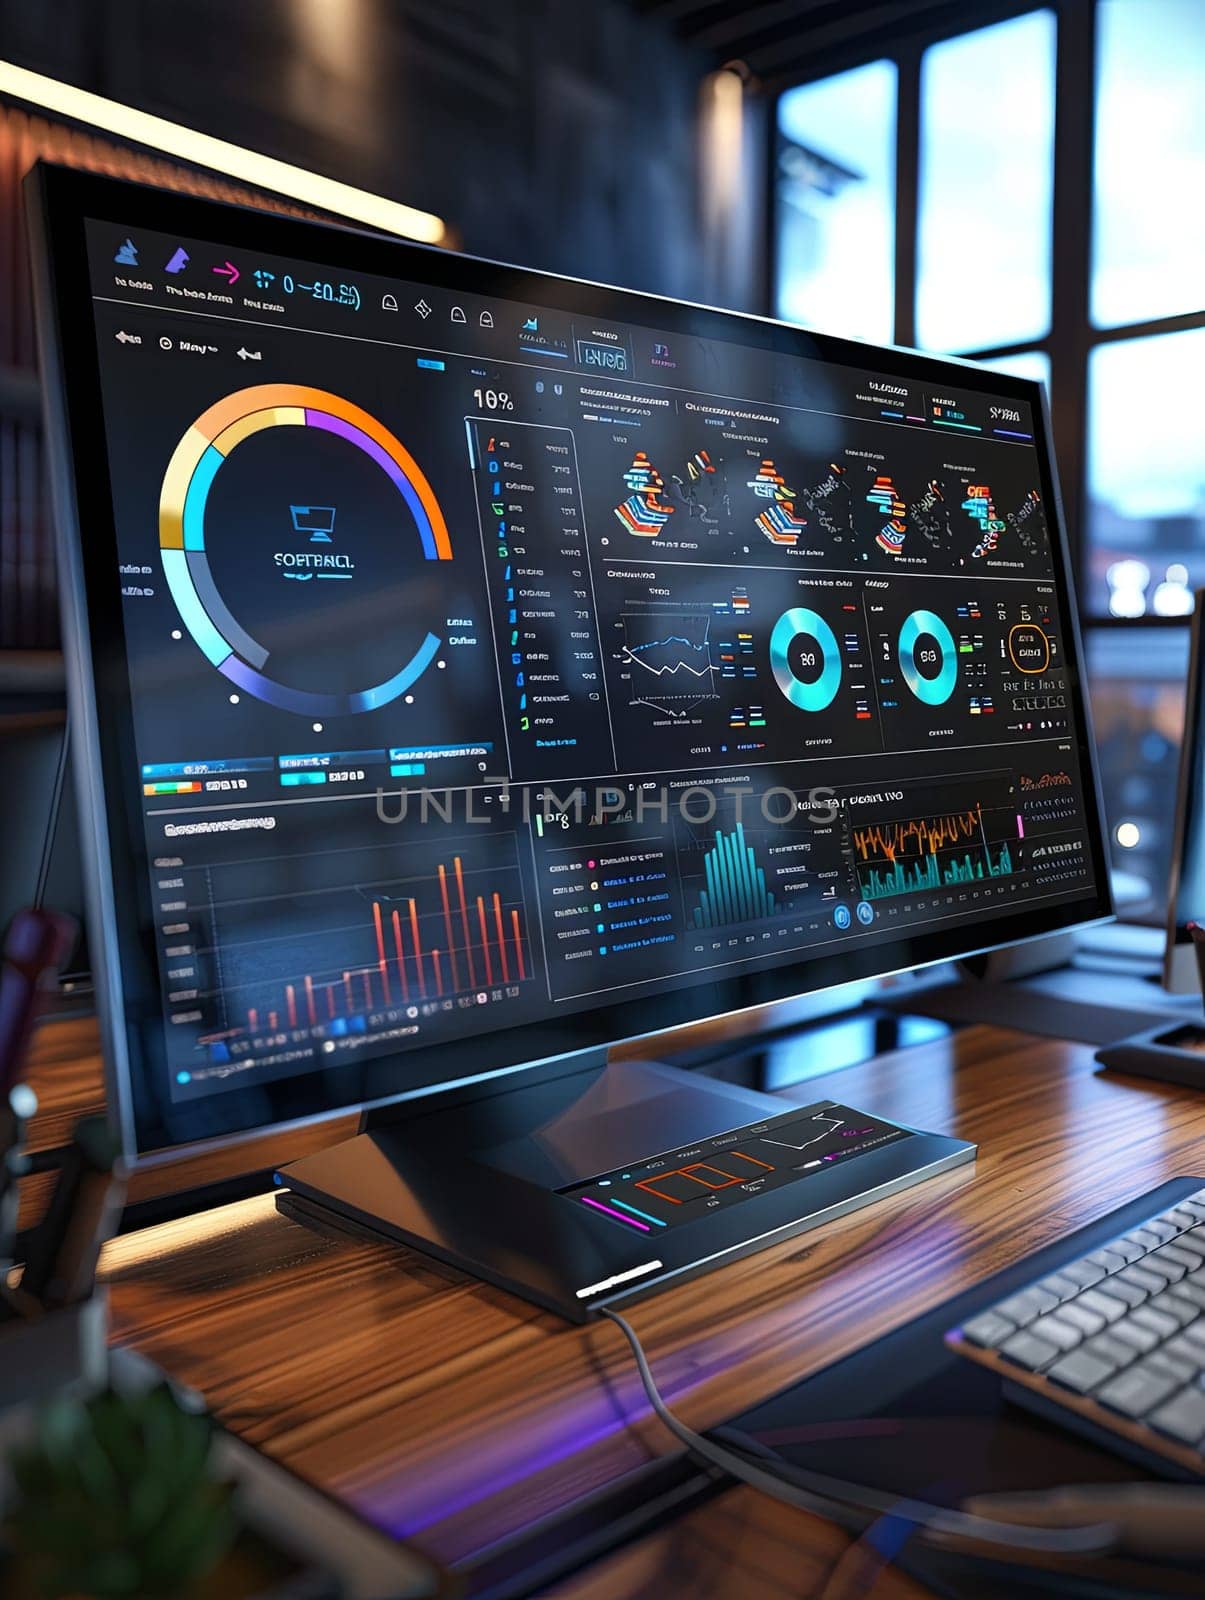 A sleek and modern analytical dashboard on a desktop computer in a professional office setting displays various charts and graphs powered by AI.